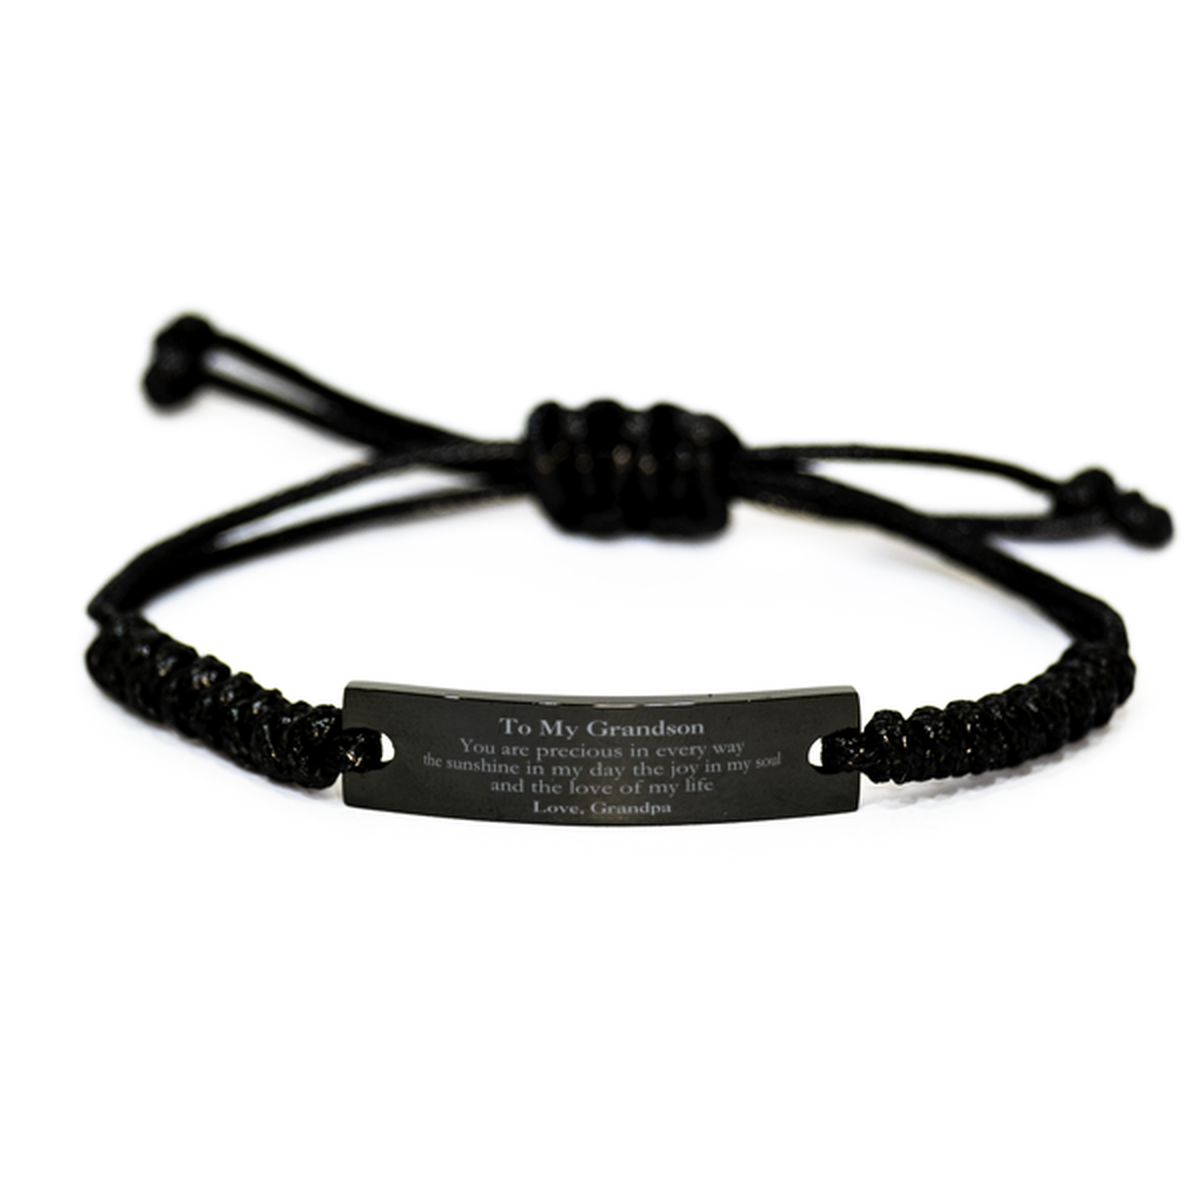 Graduation Gifts for Grandson Black Rope Bracelet Present from Grandpa, Christmas Grandson Birthday Gifts Grandson You are precious in every way the sunshine in my day. Love, Grandpa